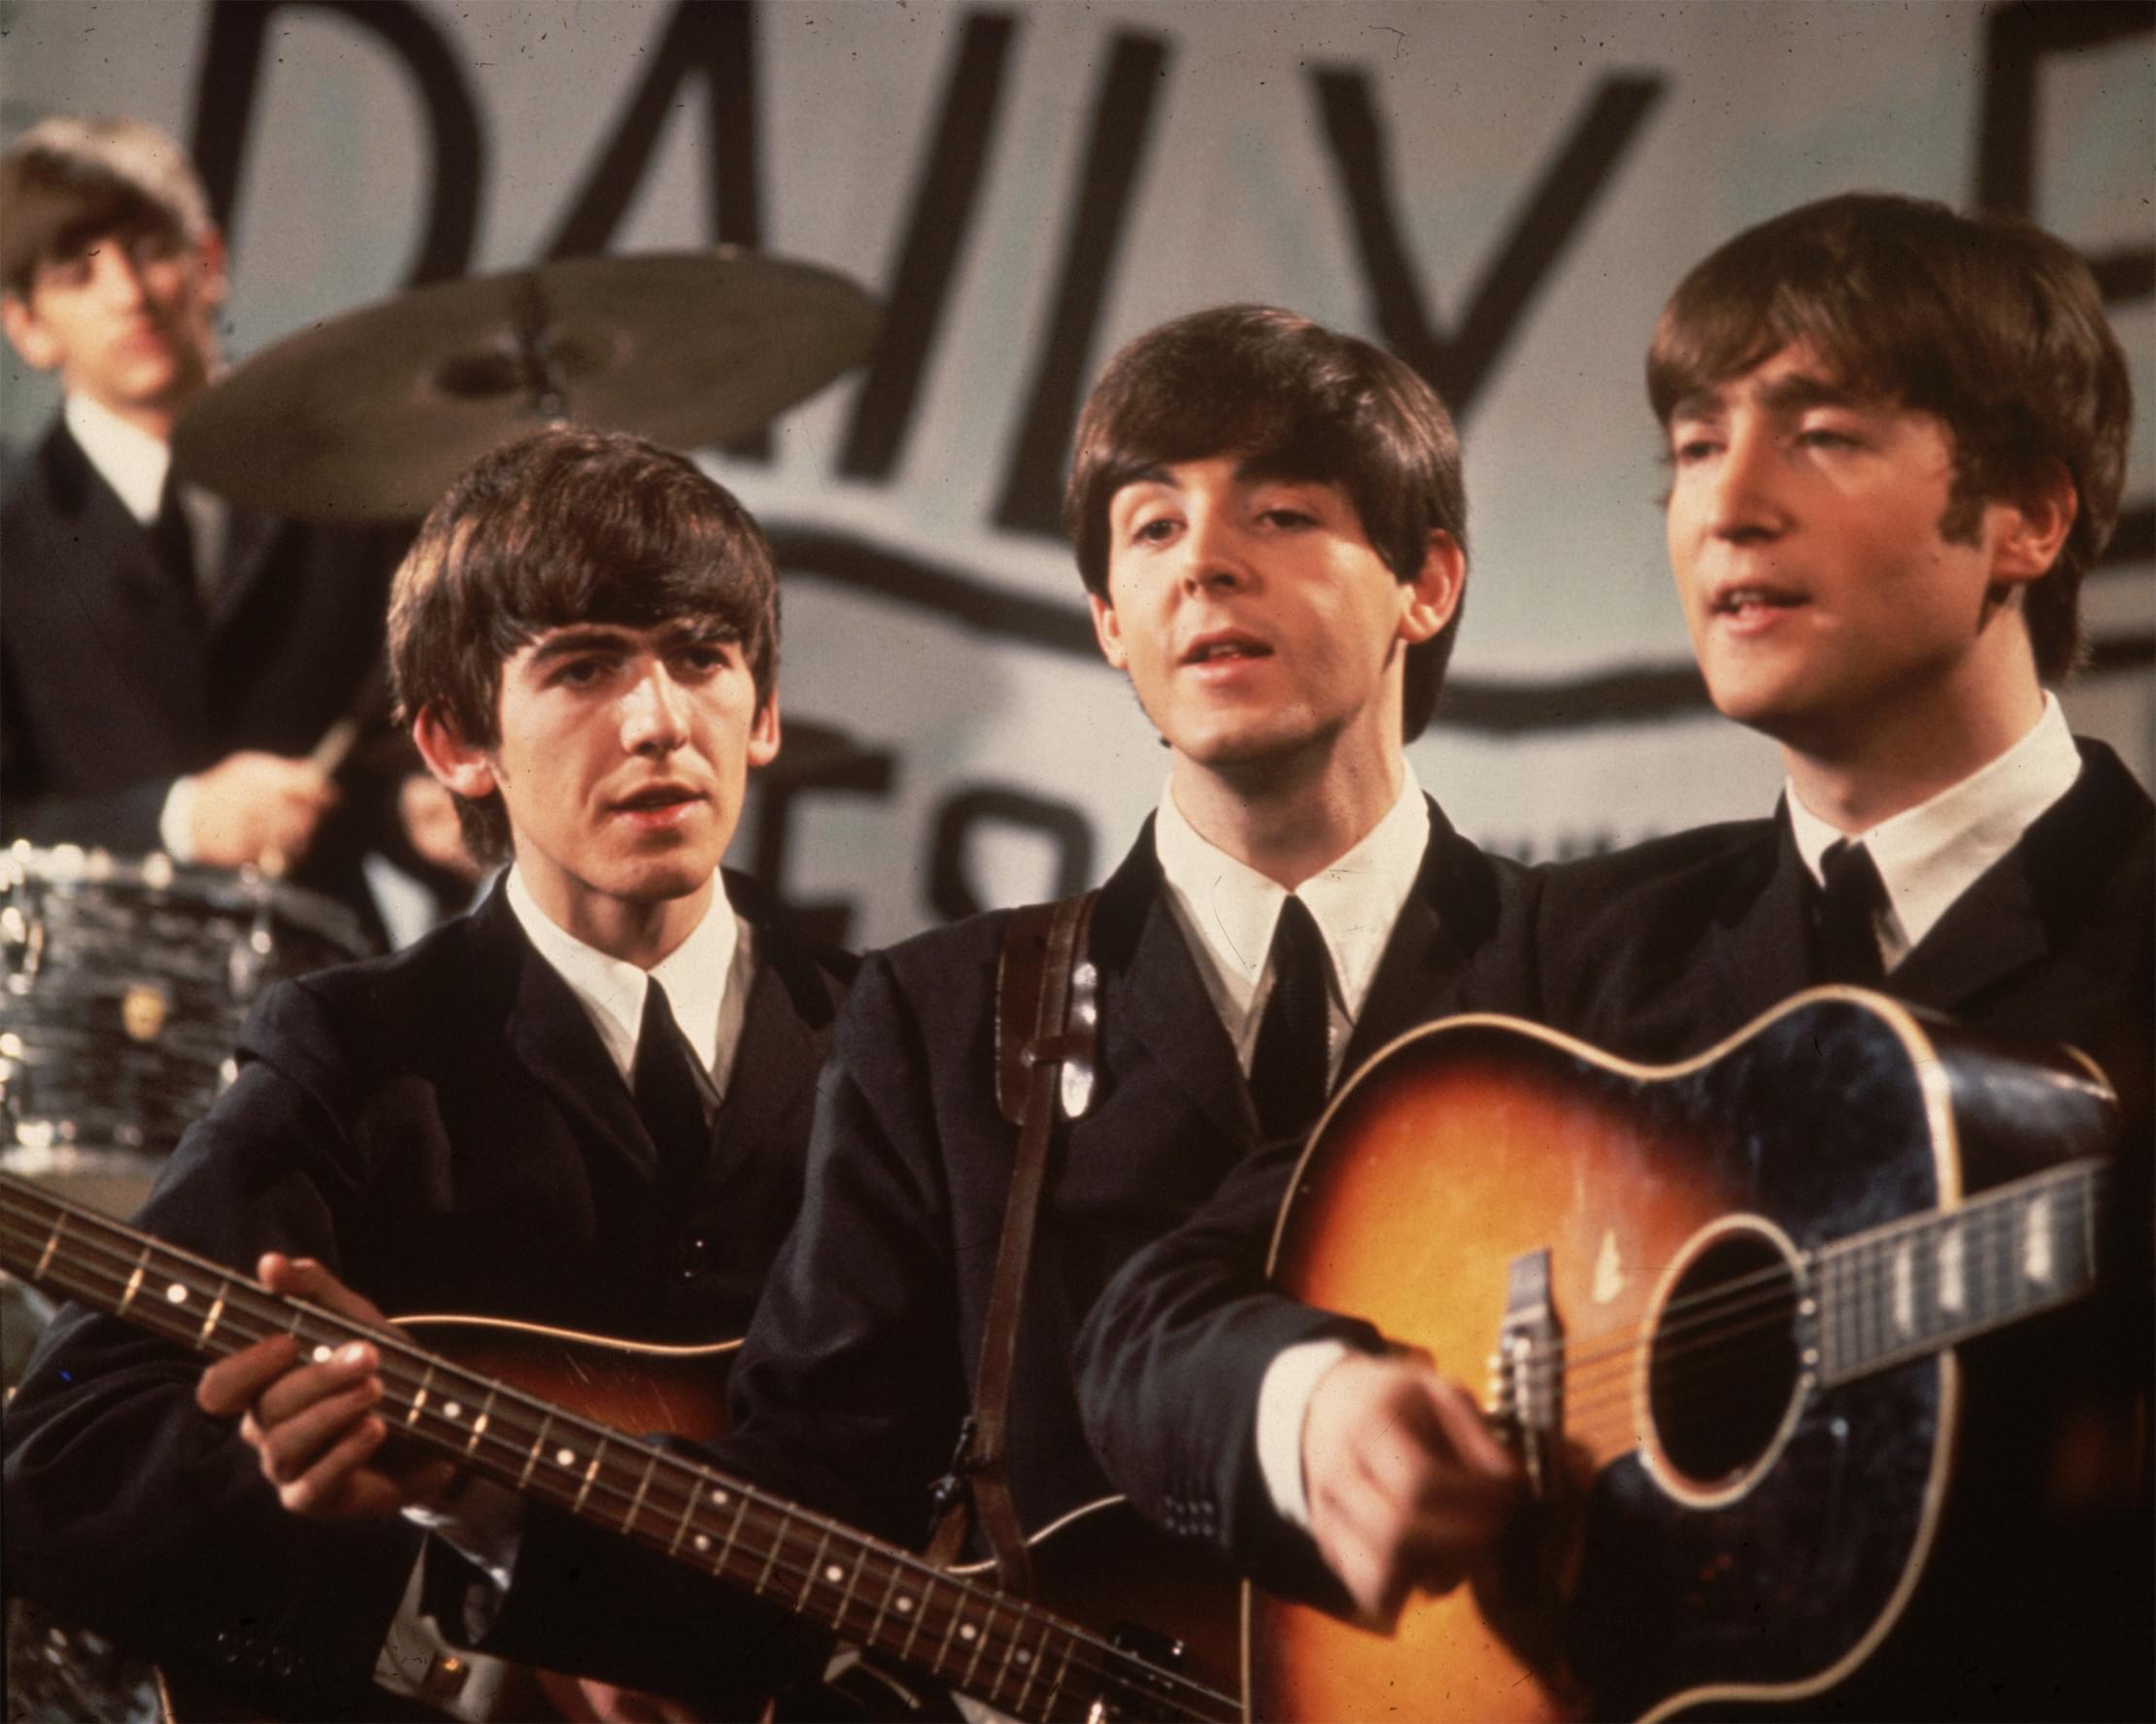 The Beatles’ ‘Tomorrow Never Knows’ tops ‘Greatest Songs’ list